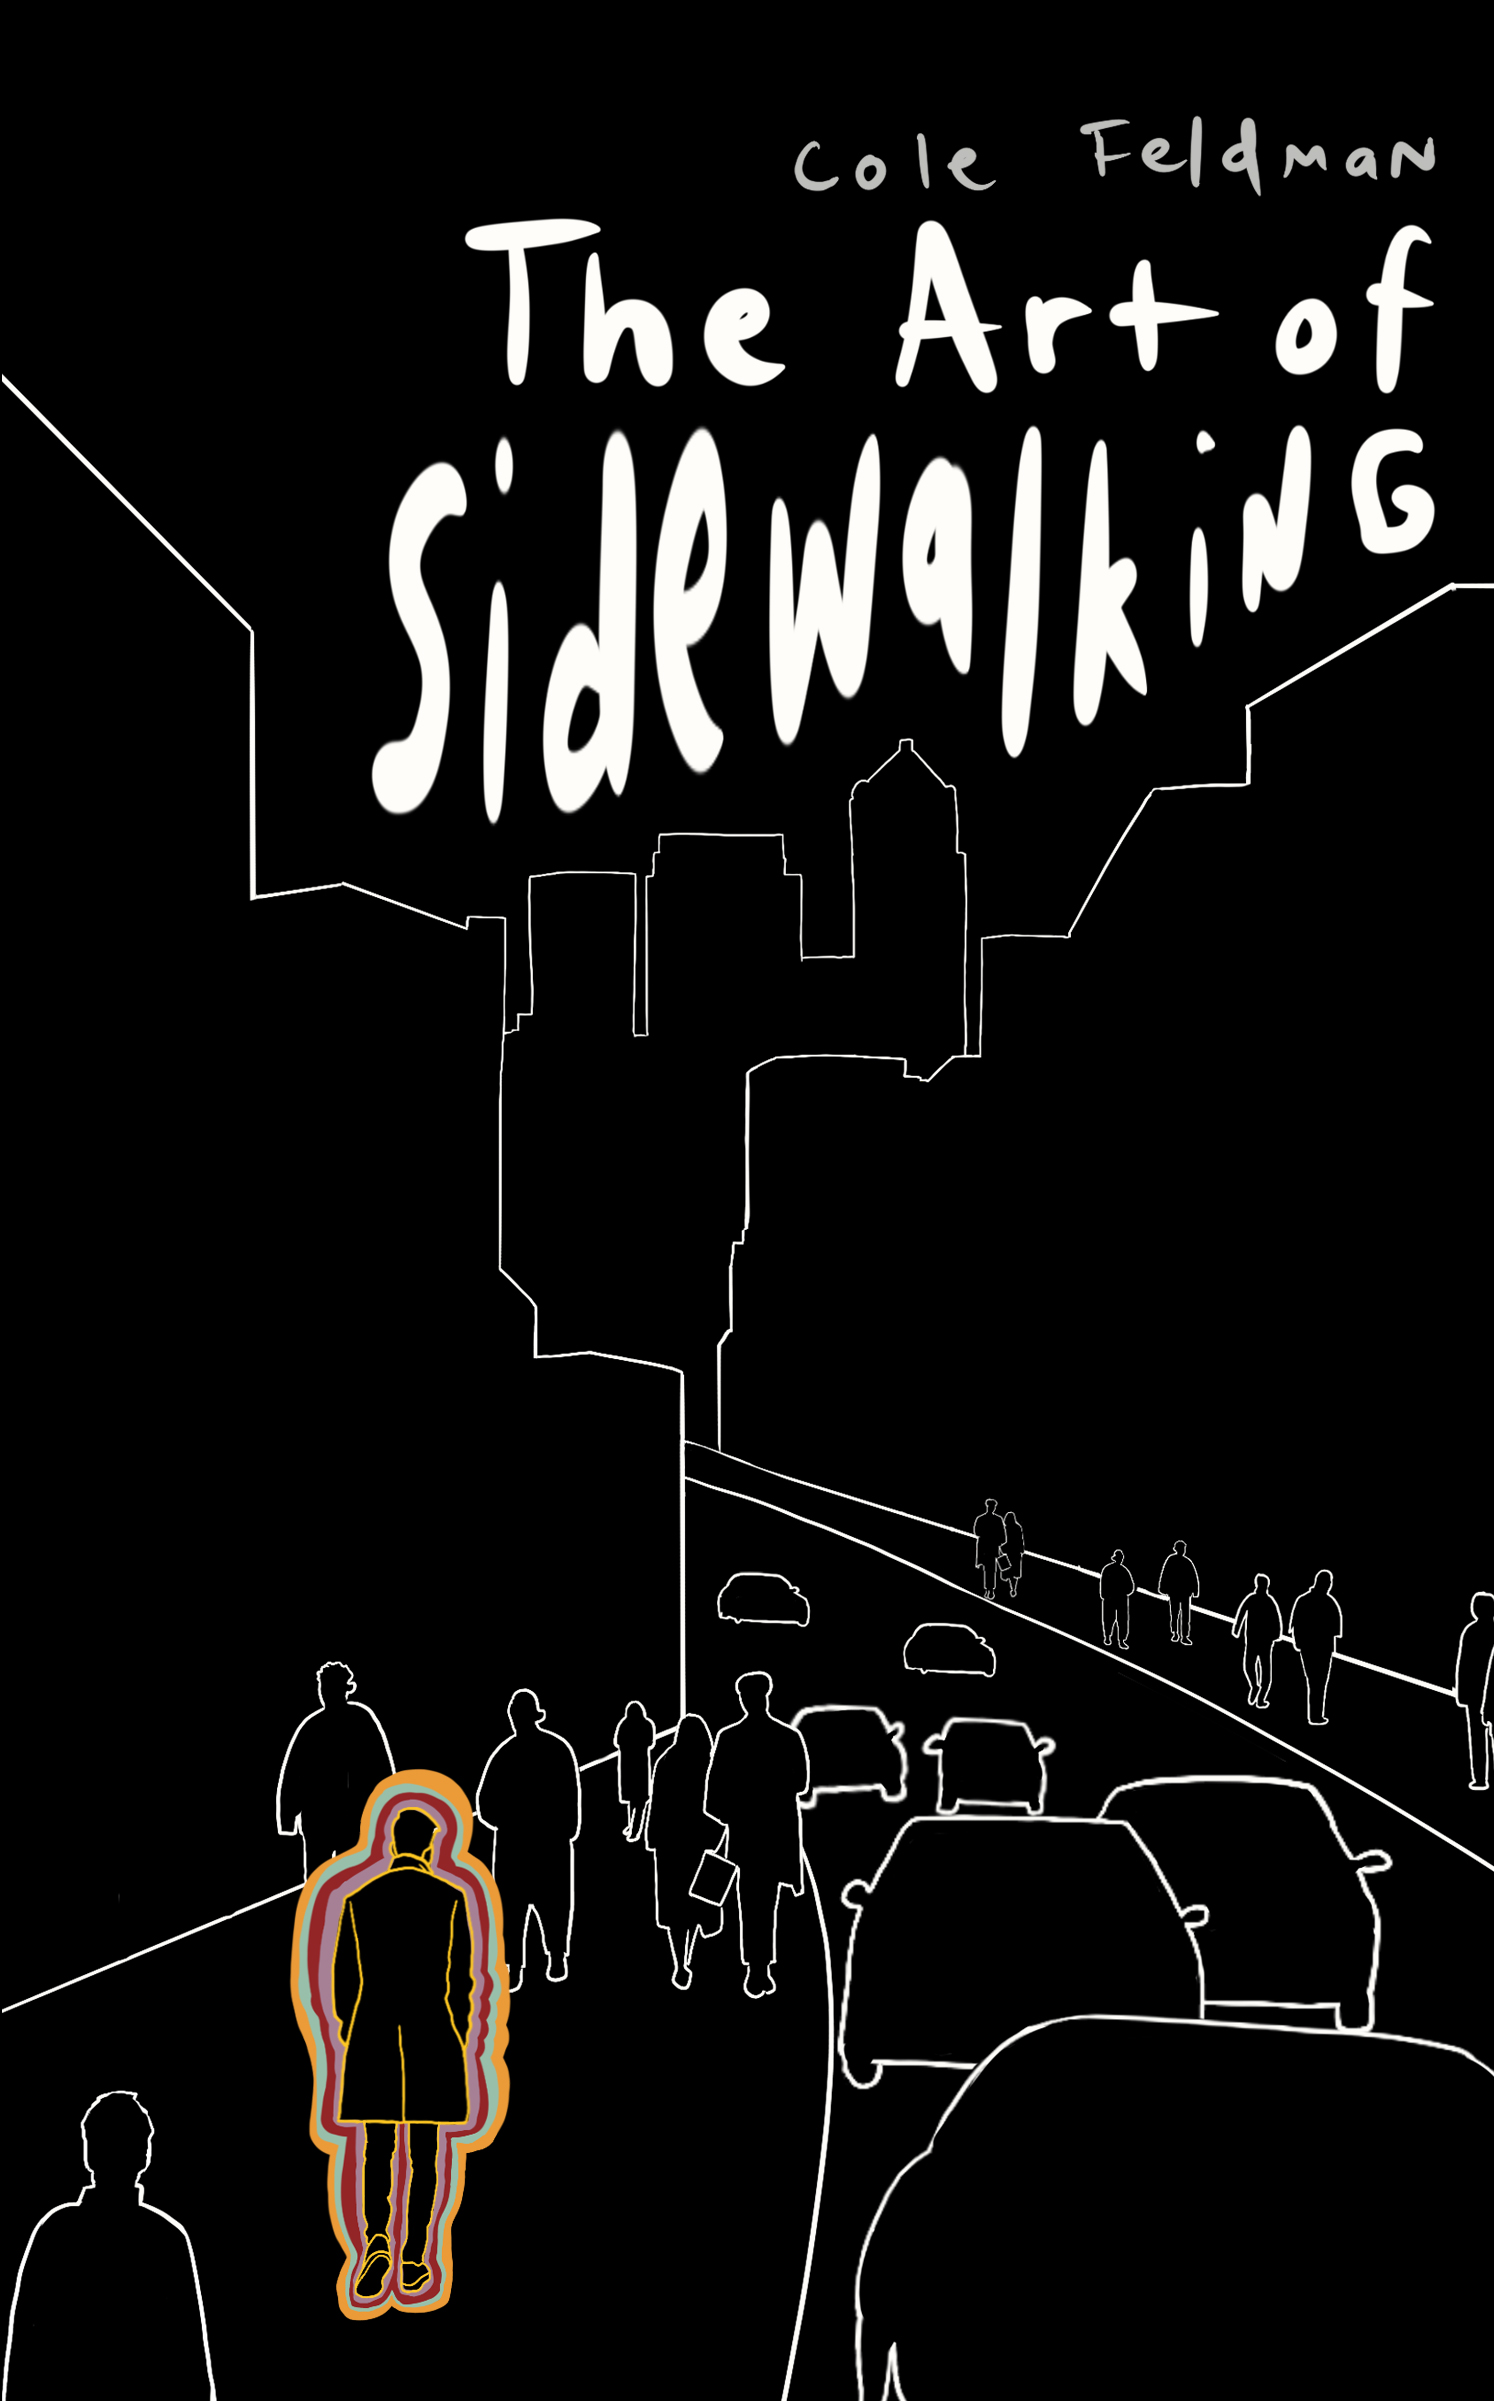 Front cover of The Art of Sidewalking, a book of poetry